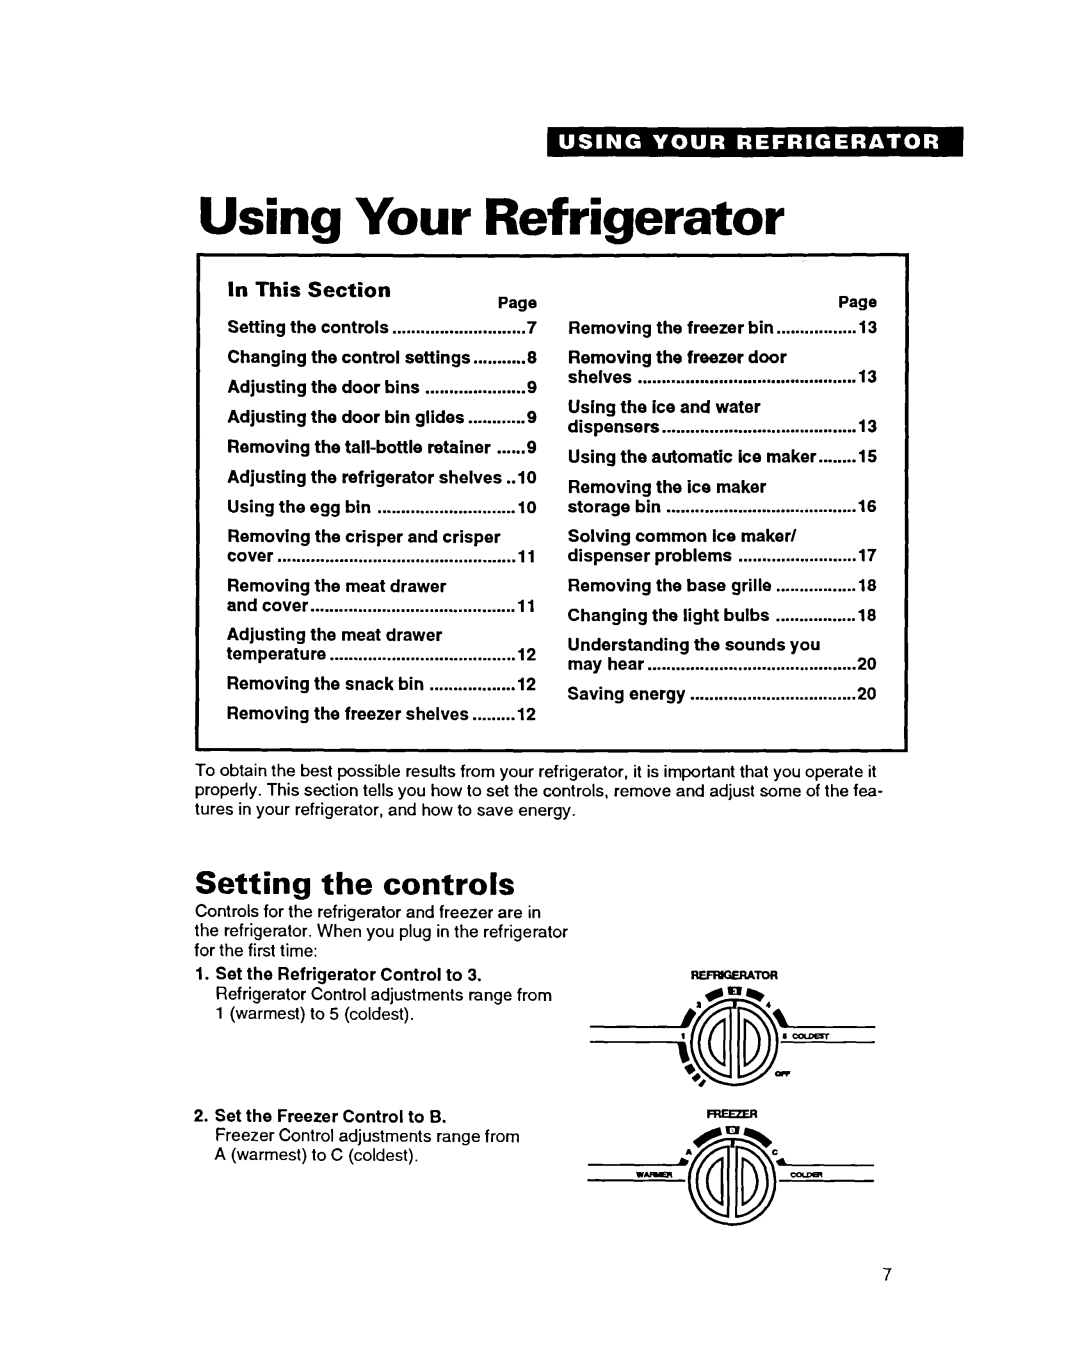 Whirlpool ED22PC important safety instructions Using Your Refrigerator, Setting the controls, In This, Section 